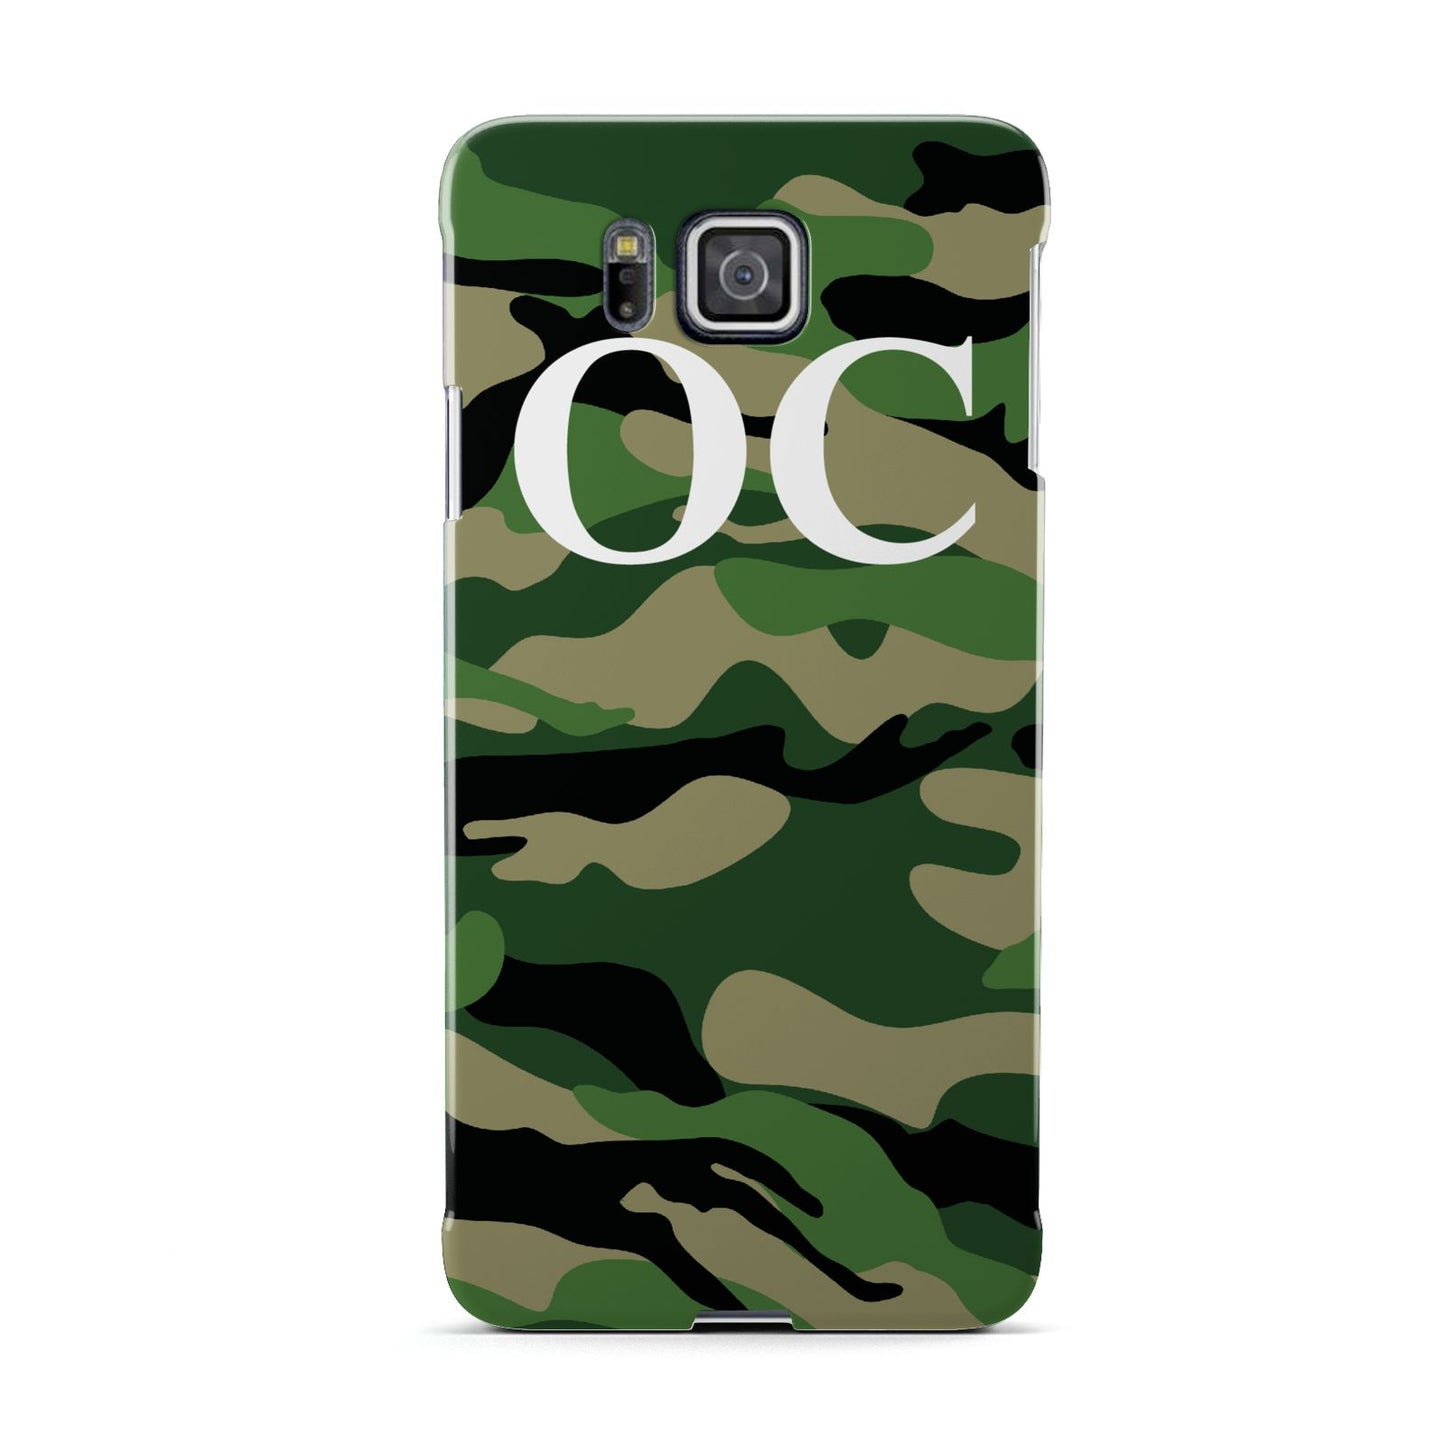 Personalised Camouflage Samsung Galaxy Alpha Case